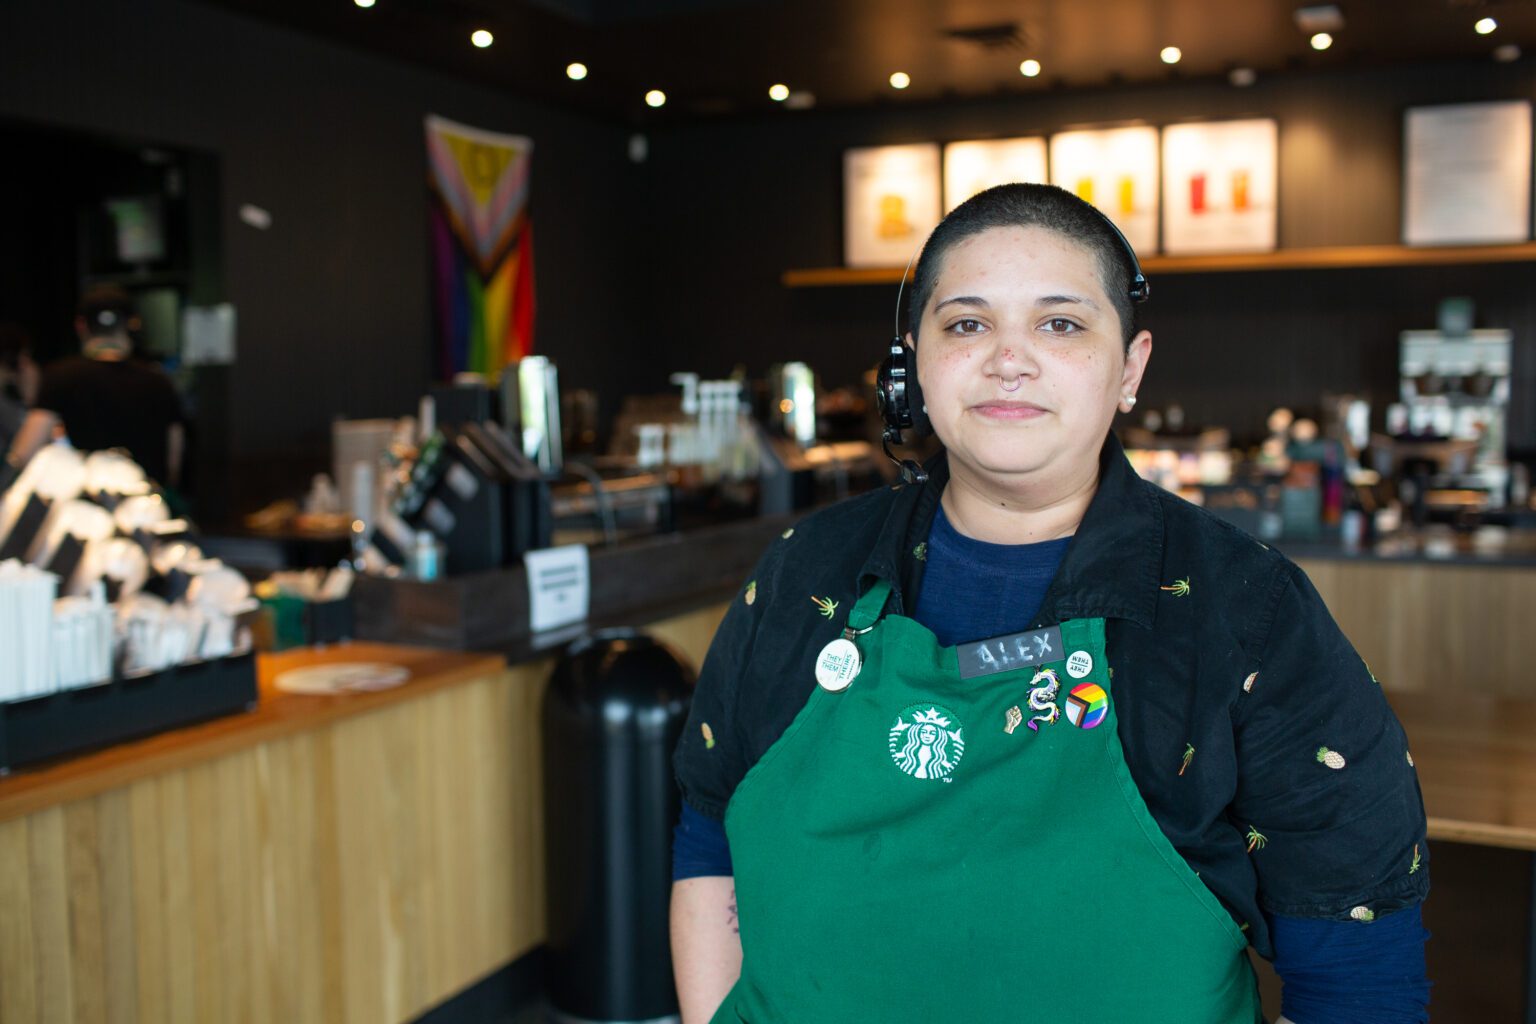 Alex Ruderman is a shift lead at the Cordata Starbucks and said management has tried to scare and encourage them and other coworkers into voting against forming a union. Despite management's efforts